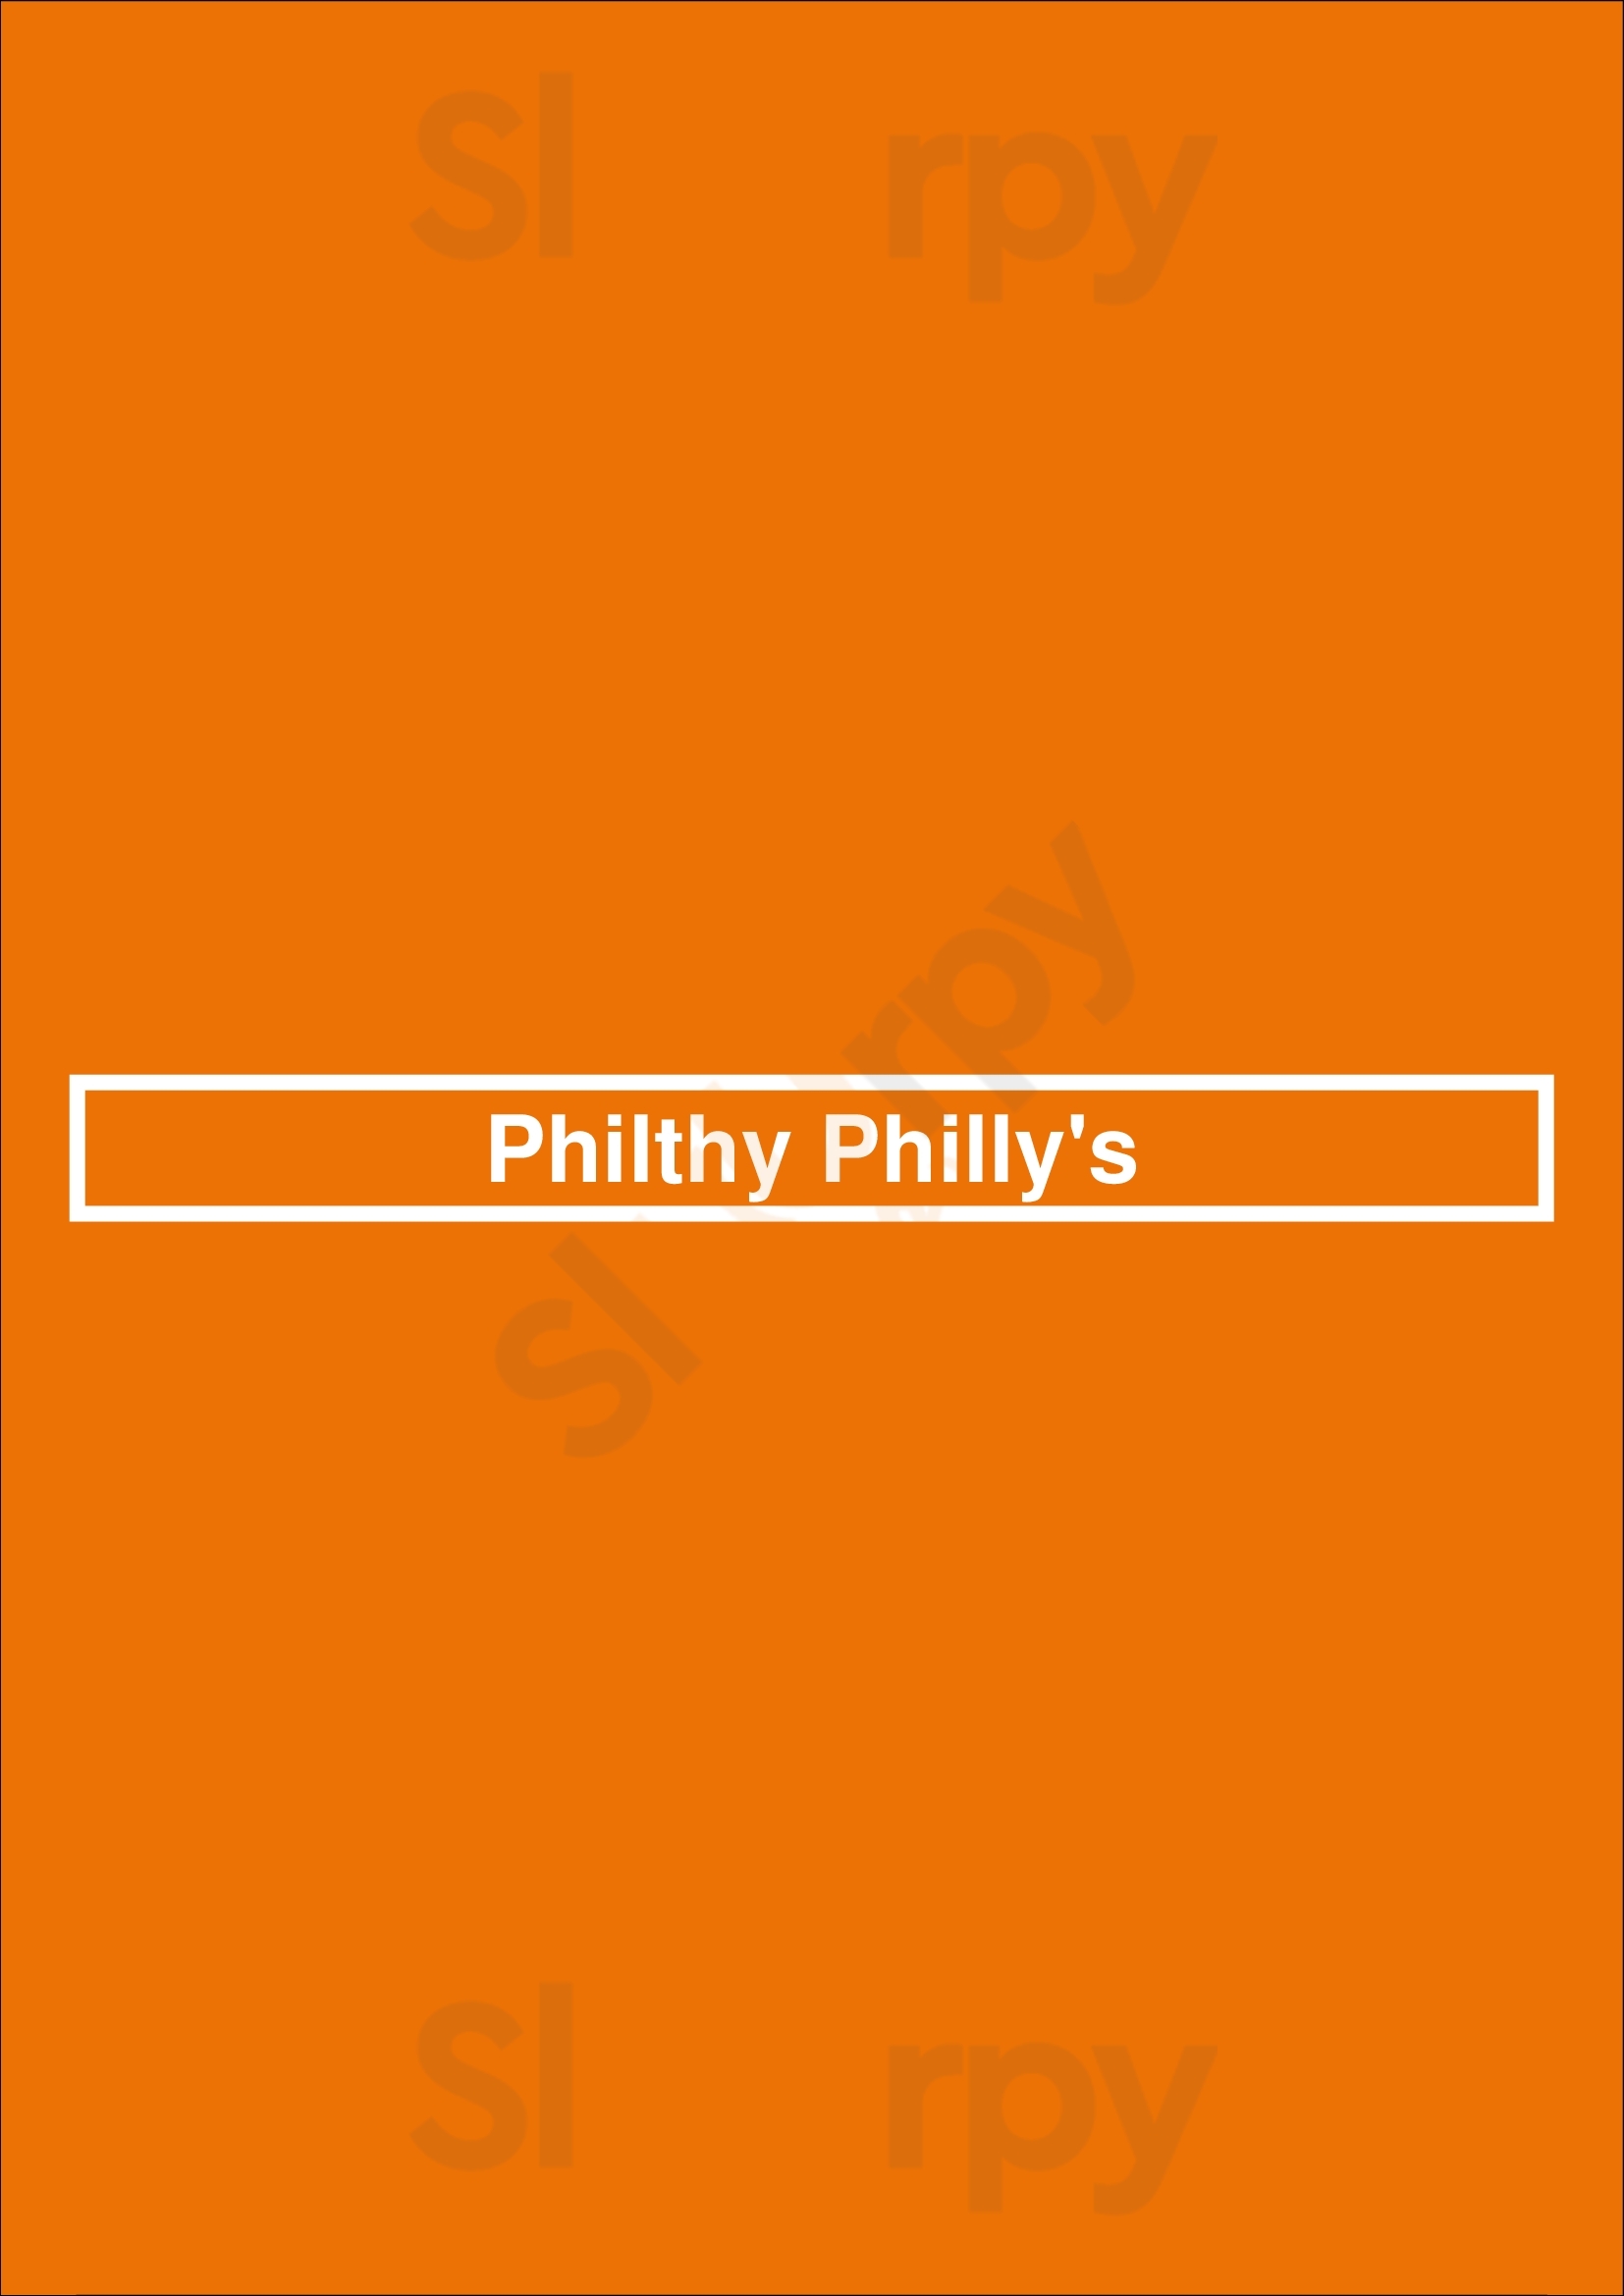 Philthy Philly's Mississauga Menu - 1